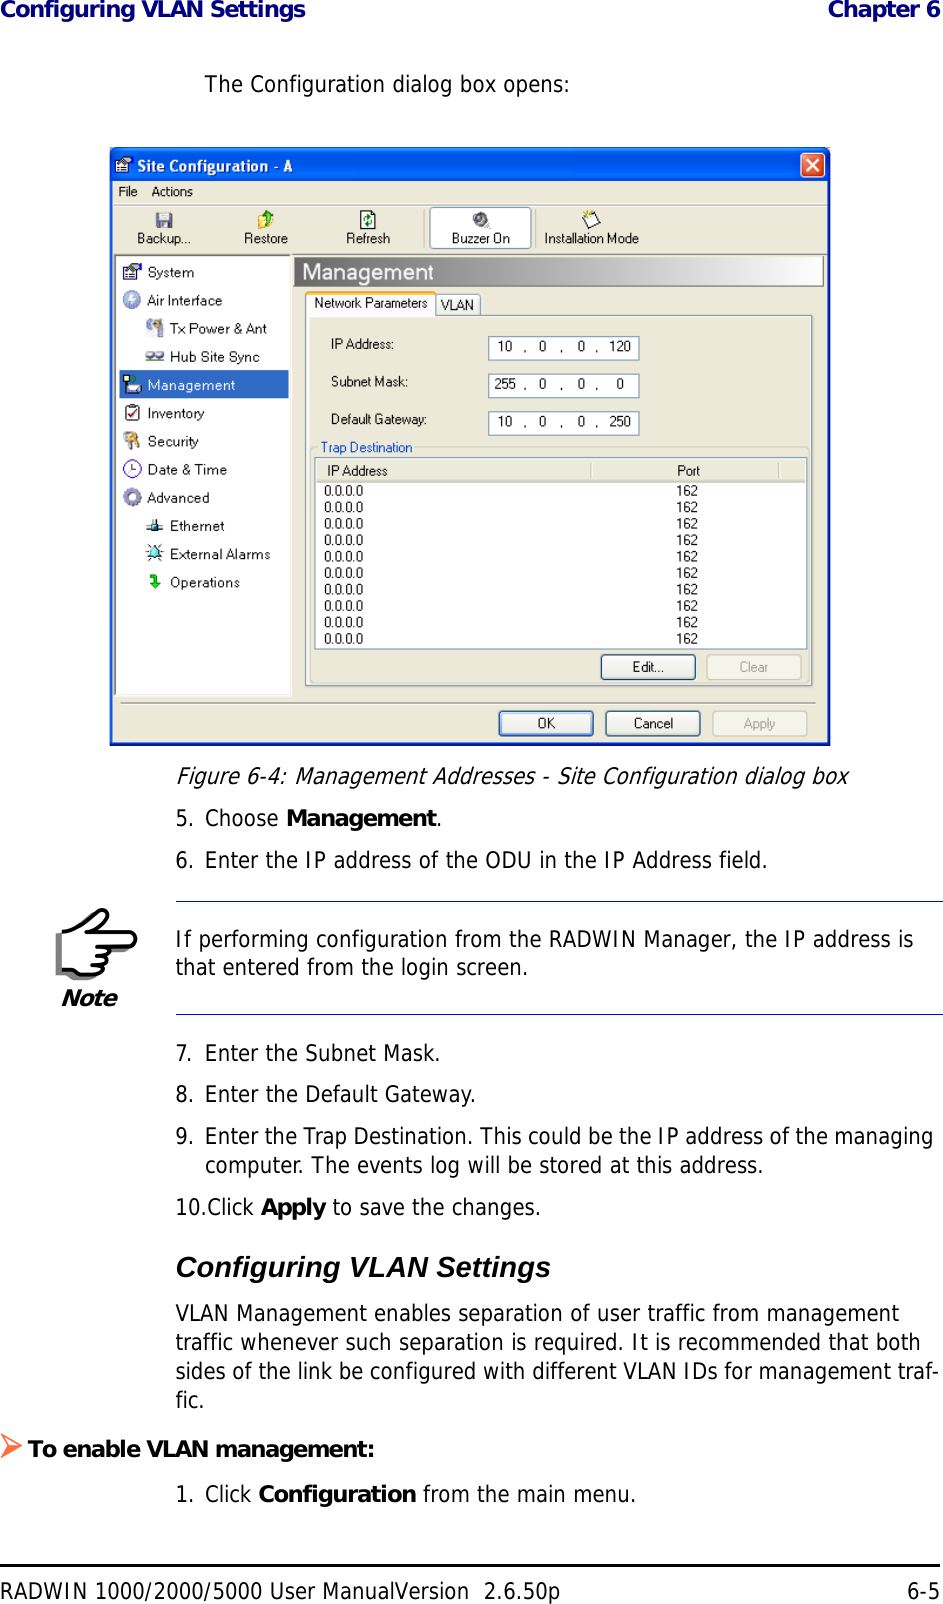 Configuring VLAN Settings  Chapter 6RADWIN 1000/2000/5000 User ManualVersion  2.6.50p 6-5The Configuration dialog box opens:Figure 6-4: Management Addresses - Site Configuration dialog box5. Choose Management.6. Enter the IP address of the ODU in the IP Address field.7. Enter the Subnet Mask.8. Enter the Default Gateway.9. Enter the Trap Destination. This could be the IP address of the managing computer. The events log will be stored at this address.10.Click Apply to save the changes.Configuring VLAN SettingsVLAN Management enables separation of user traffic from management traffic whenever such separation is required. It is recommended that both sides of the link be configured with different VLAN IDs for management traf-fic.To enable VLAN management:1. Click Configuration from the main menu.NoteIf performing configuration from the RADWIN Manager, the IP address is that entered from the login screen.